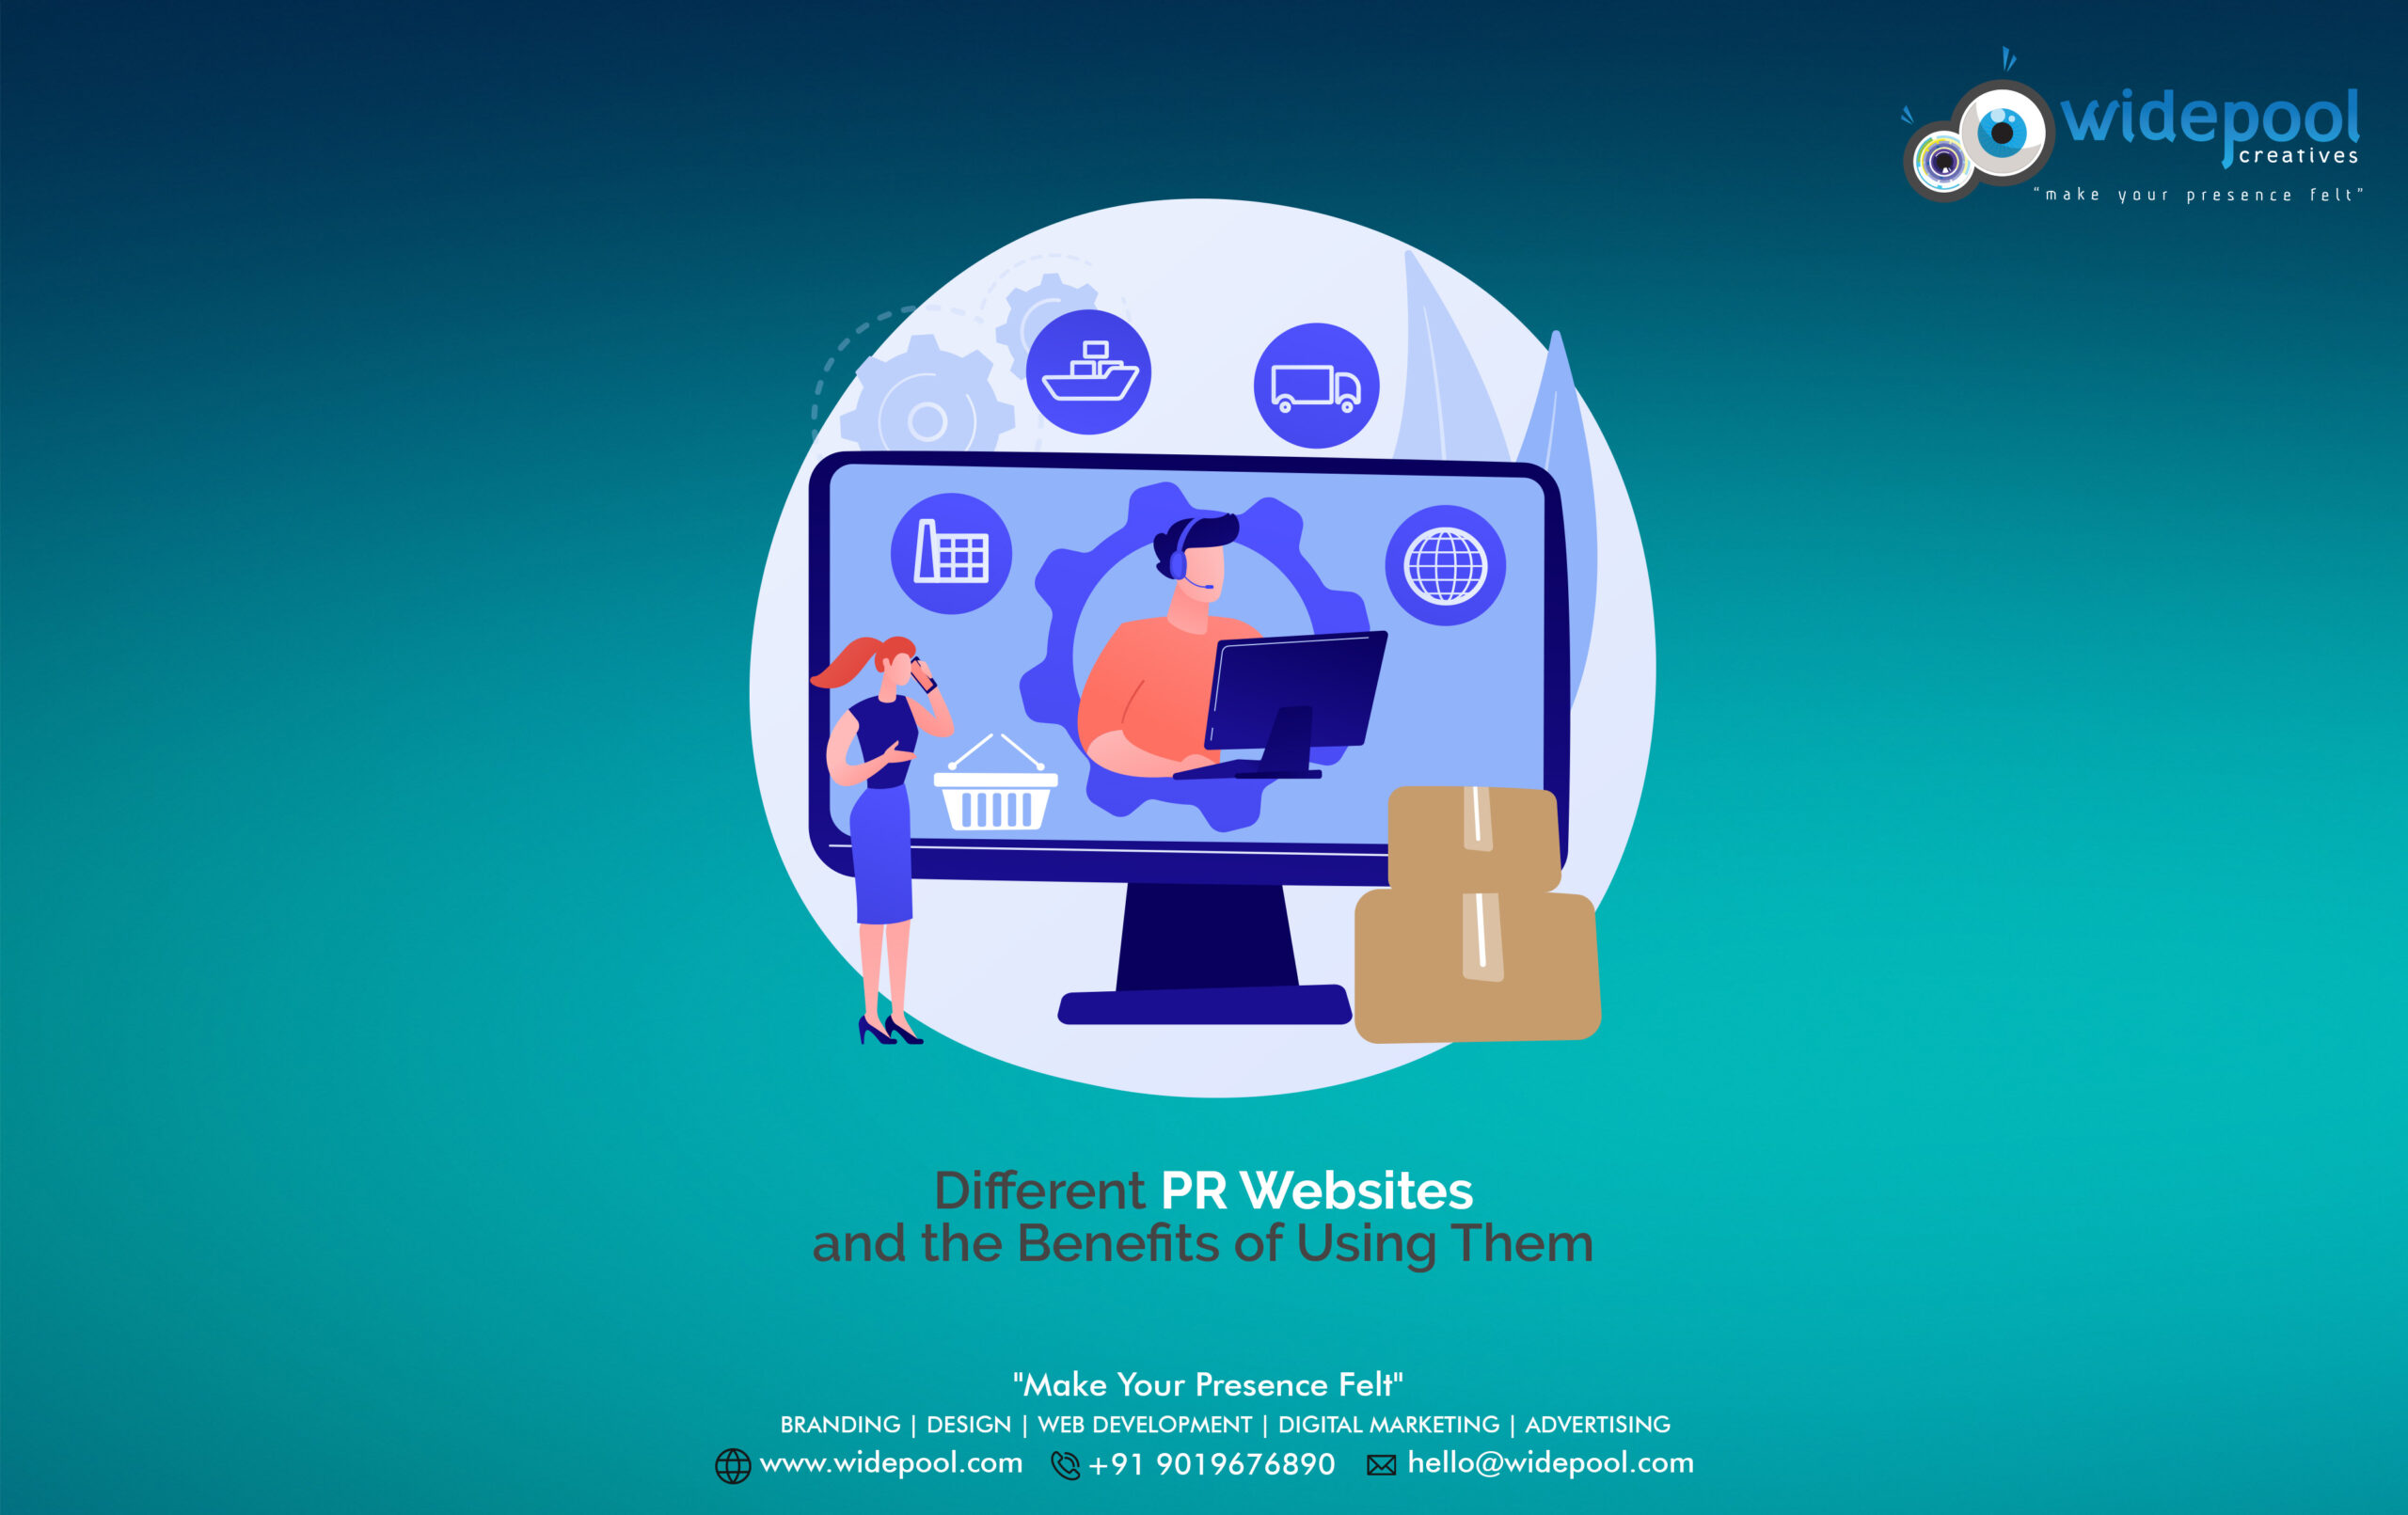 Different PR Websites and the Benefits of Using Them